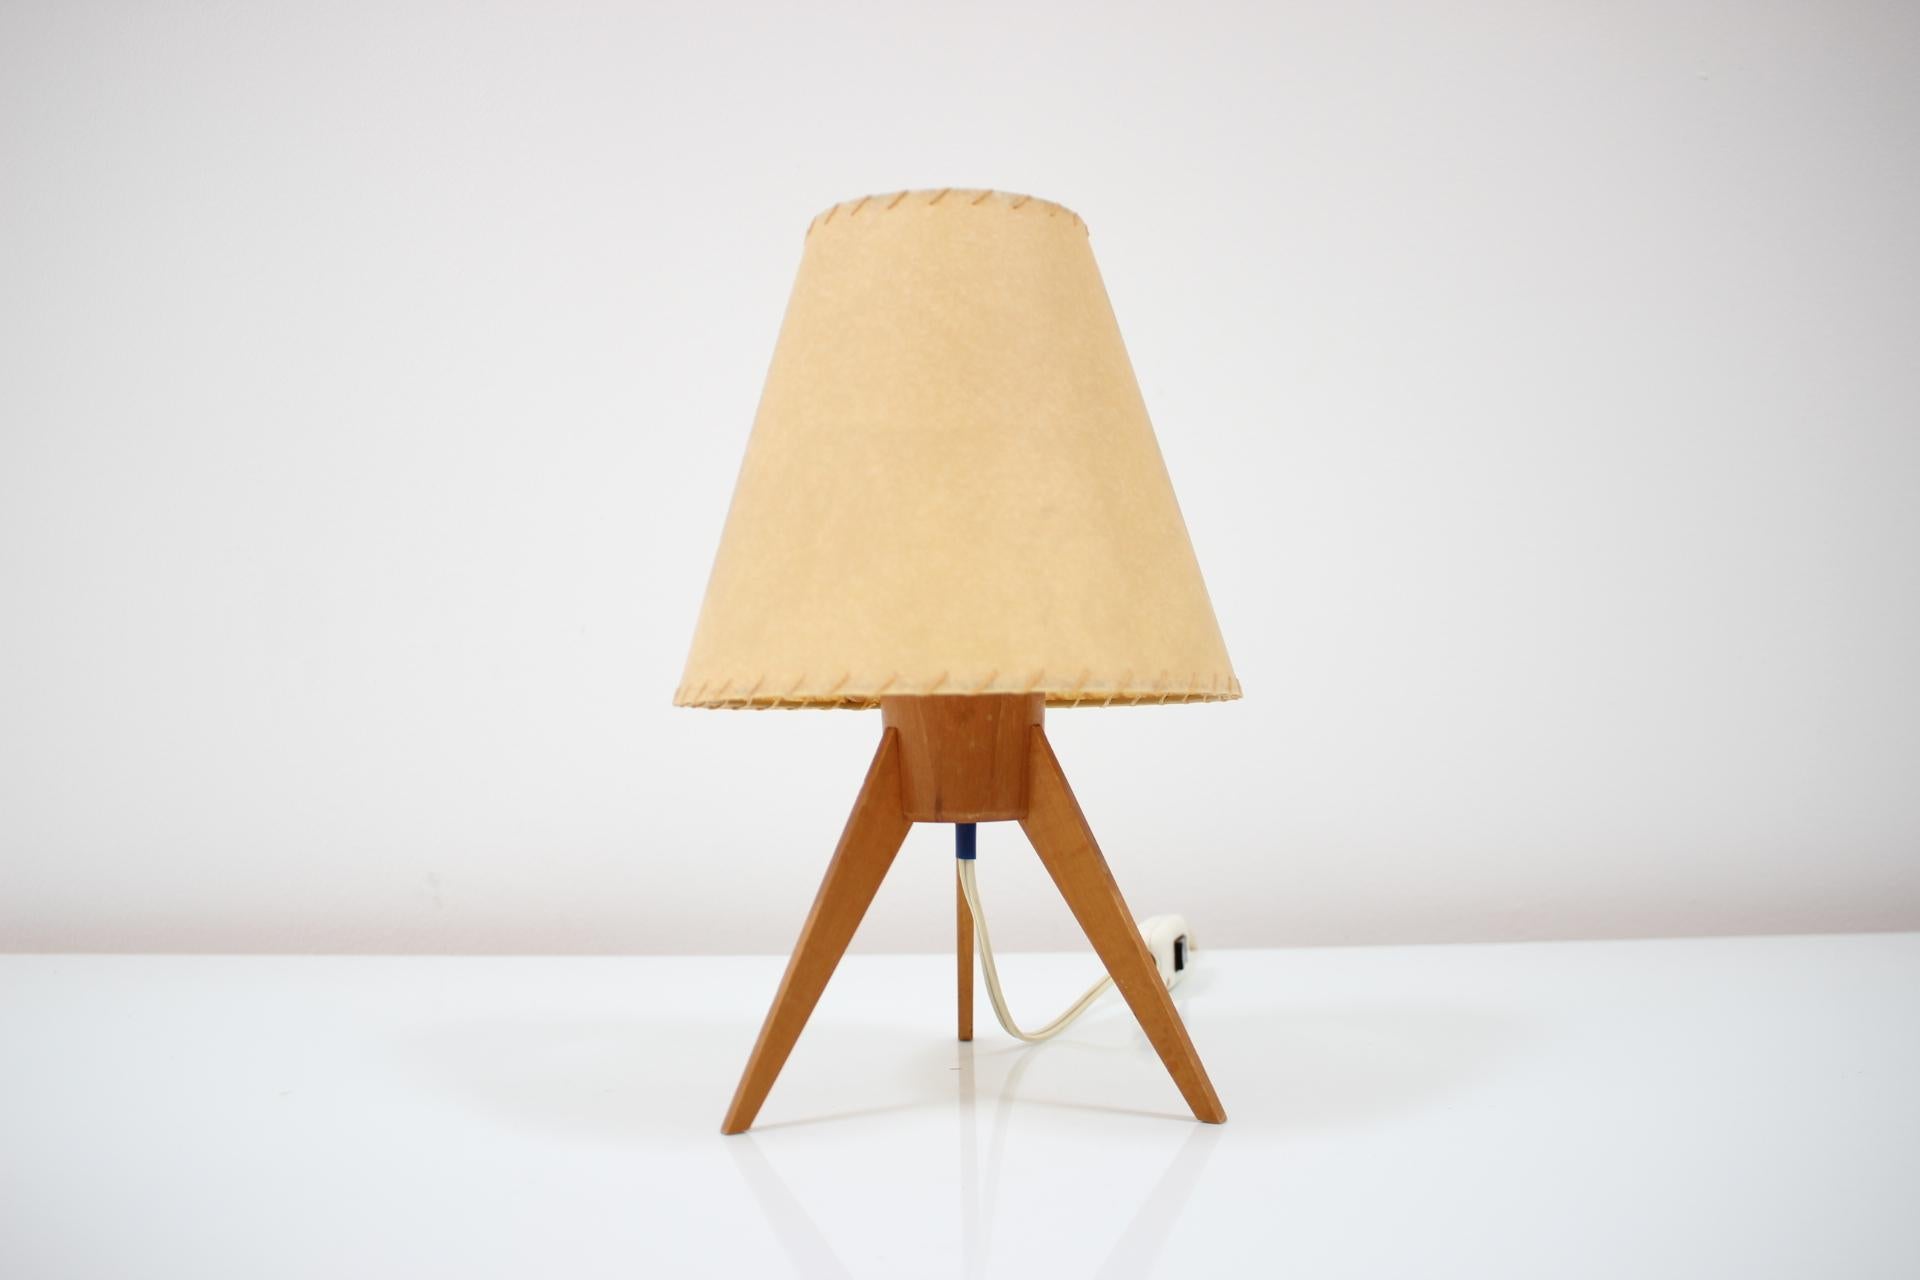 - made in Czechoslovakia
- made of wood, paper
- re-polished
- new lampshade of parchment
- fully functional
- good, original condition.